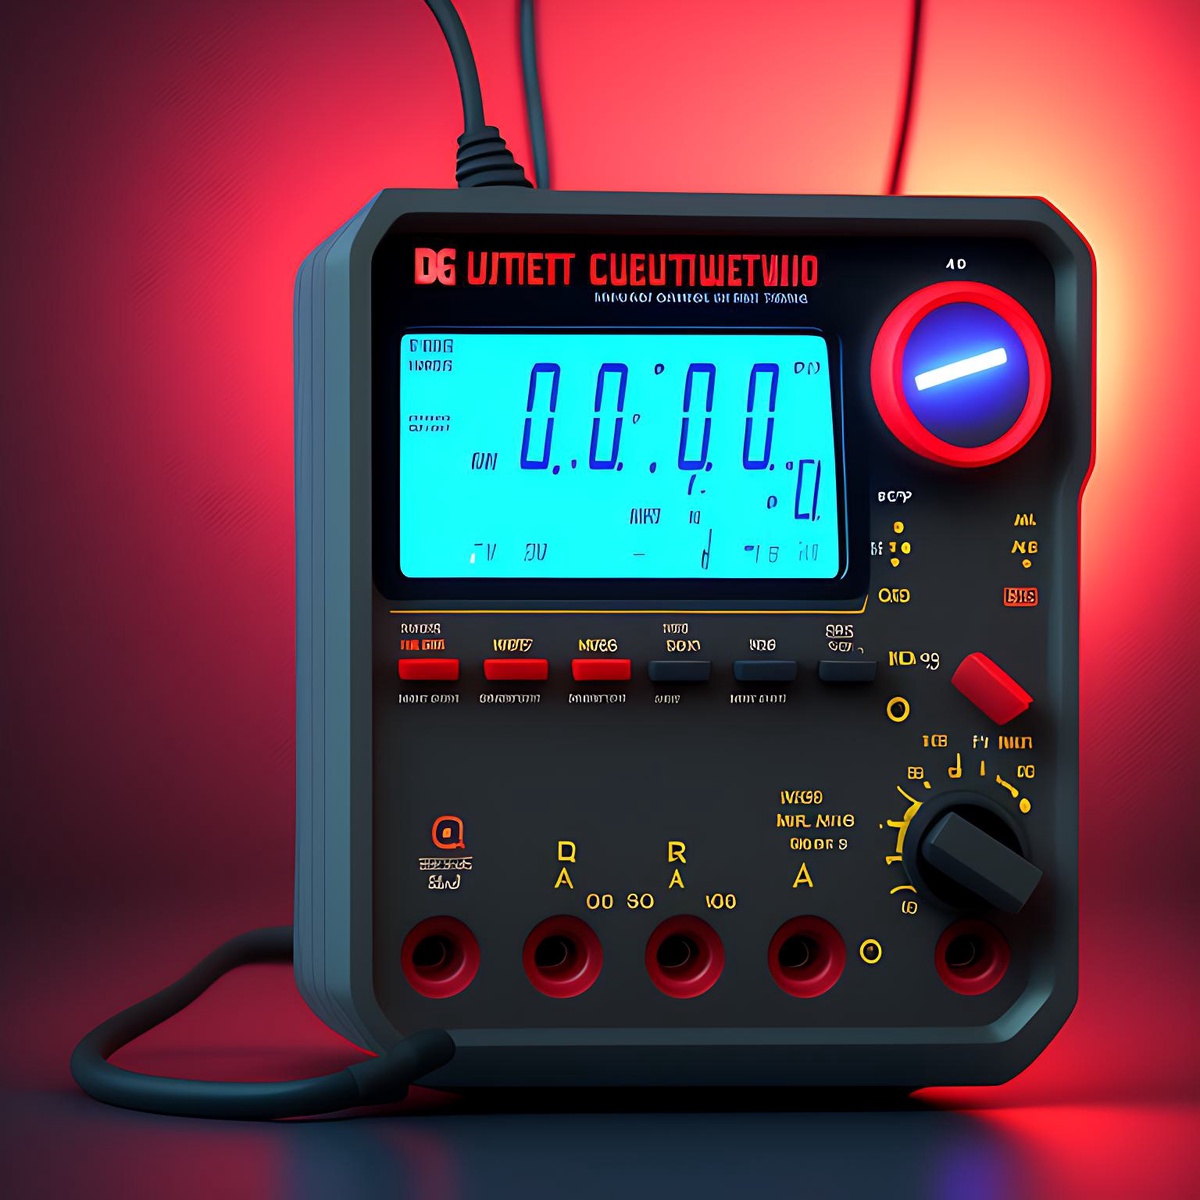 What Type of Multimeter Setting Should You Use to Measure AC Current?